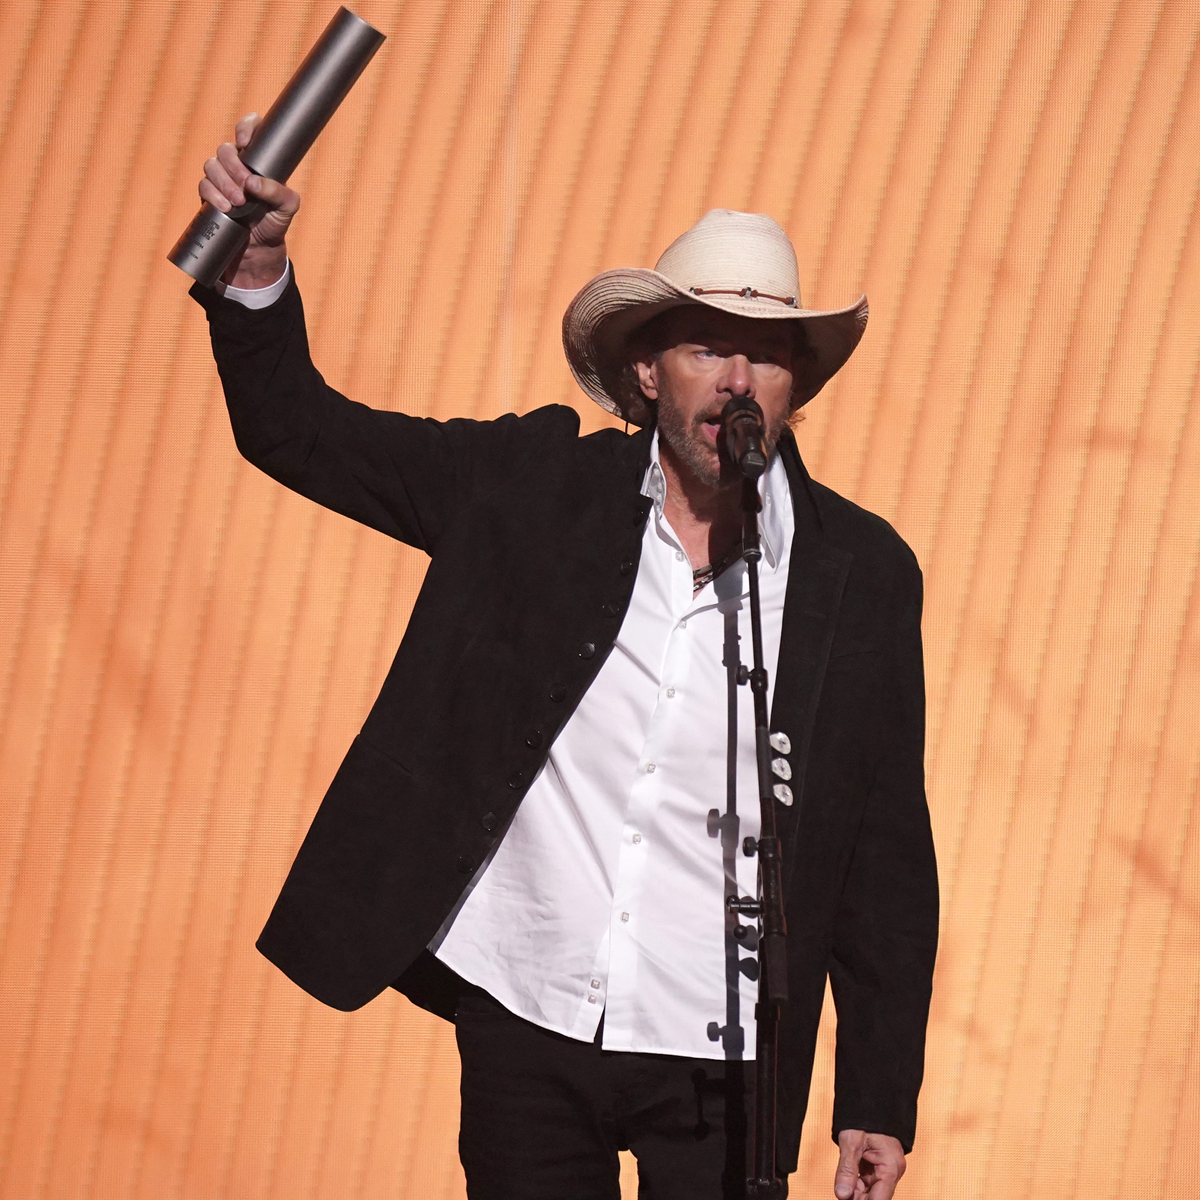 Toby Keith's Emotional Country Icon Award Speech Ain't Worth Missing